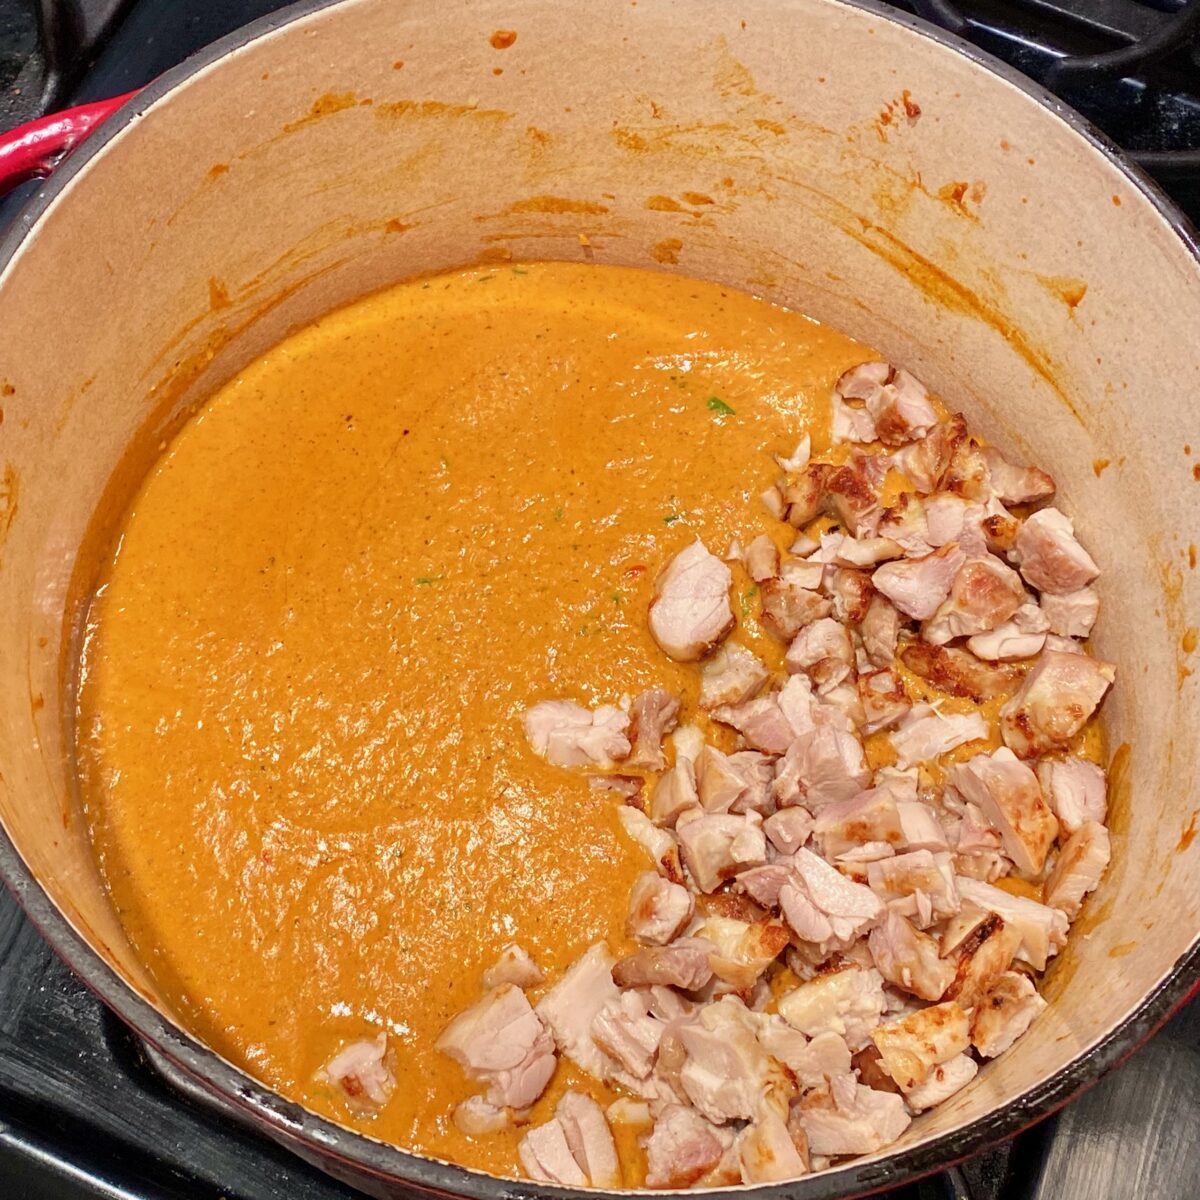 Adding the chicken to the butter sauce to warm through before serving.